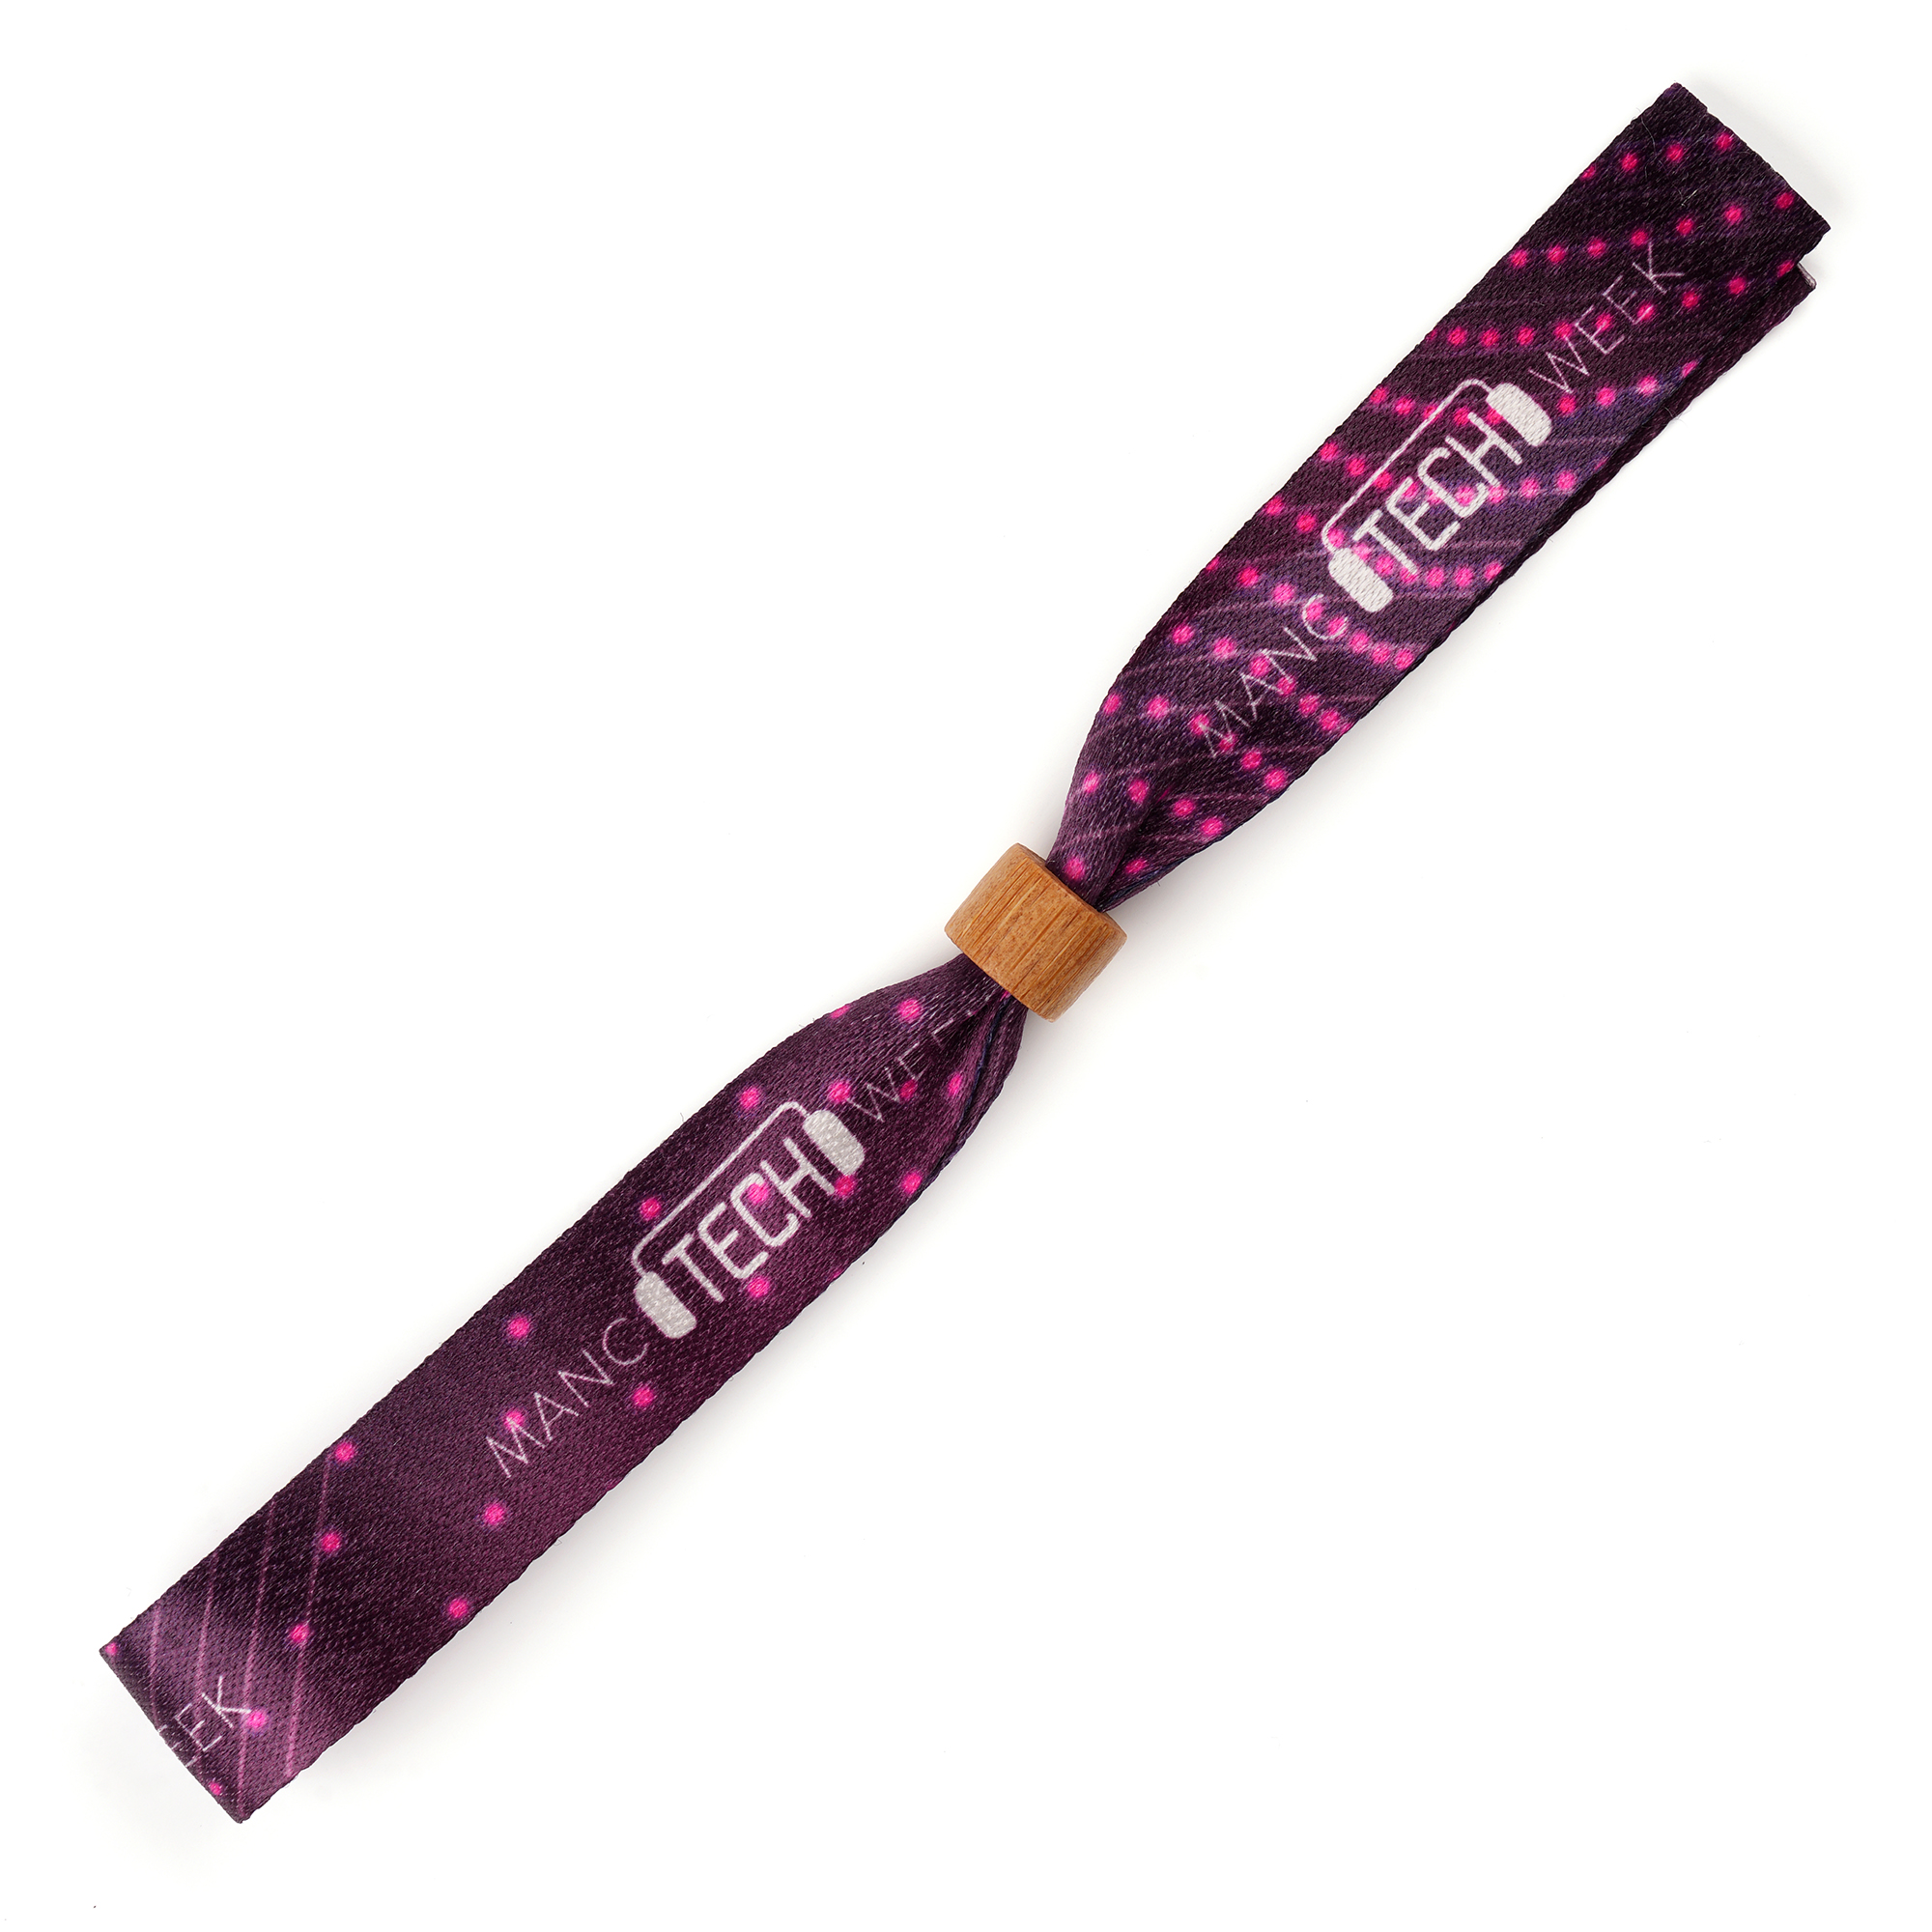 RPET 20mm wristband with adjustable wooden closing clip and full colour dye sublimation to one or both sides.